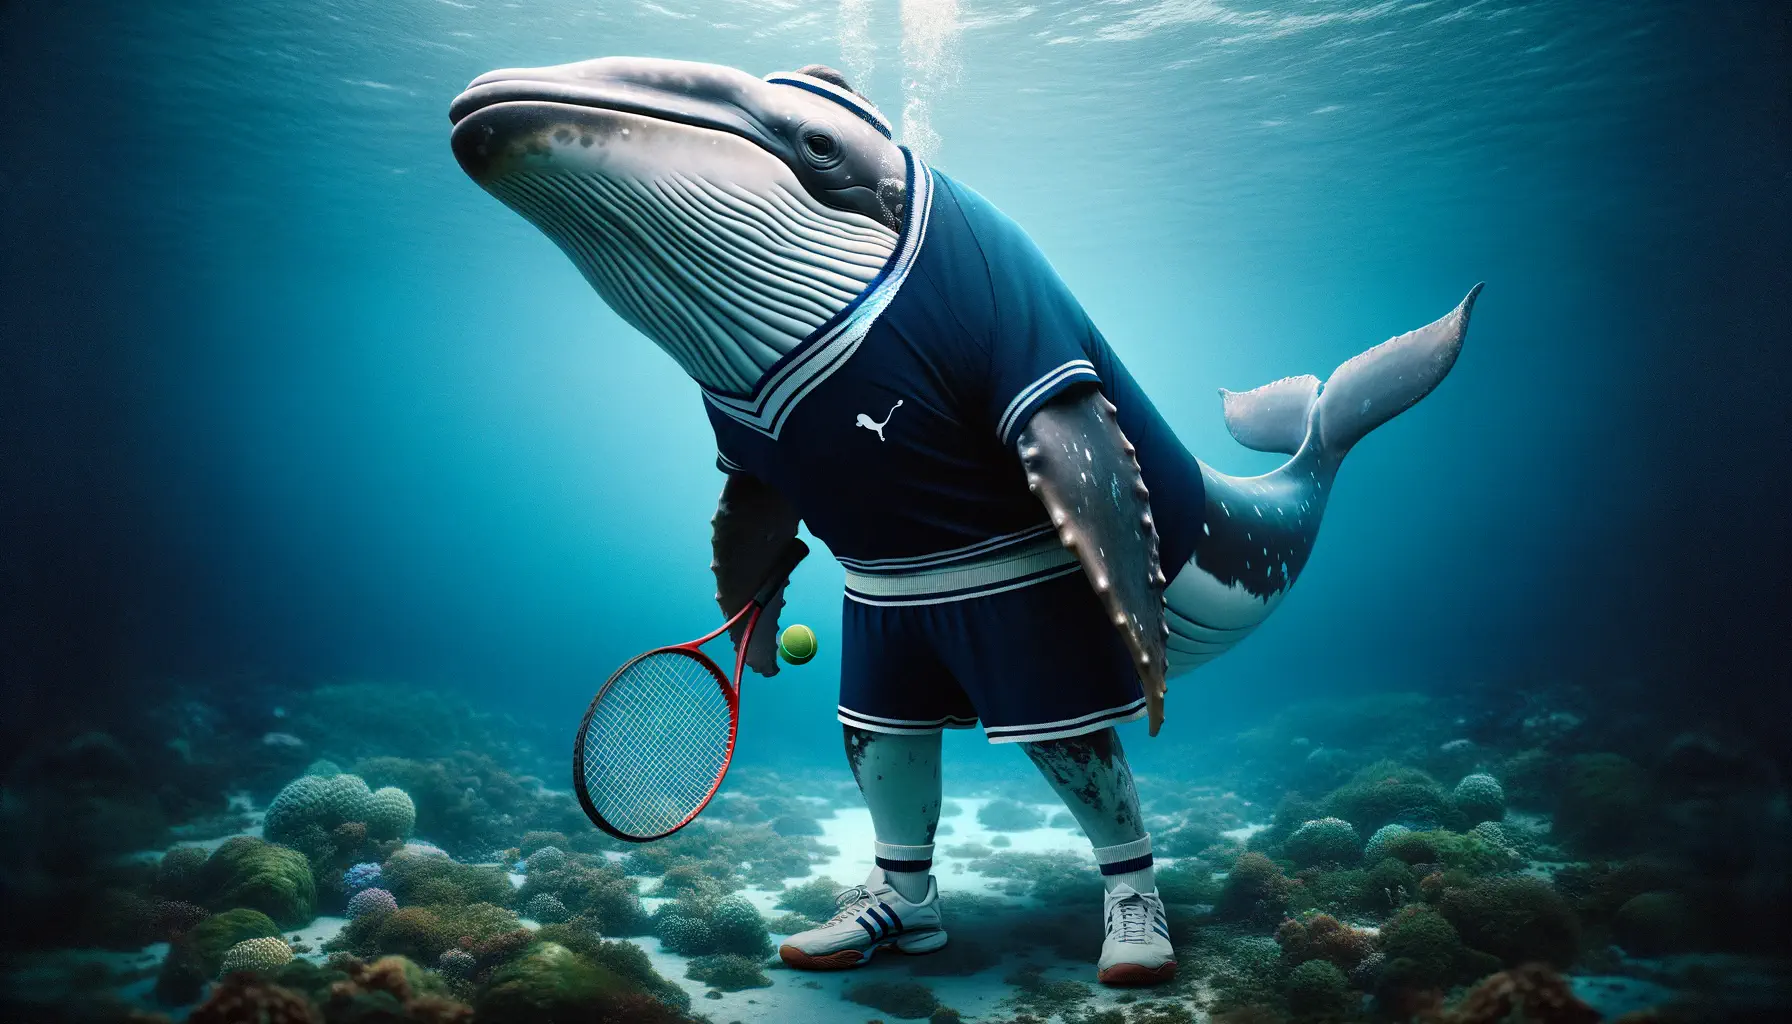 A photo-realistic image of a whale dressed to play tennis.